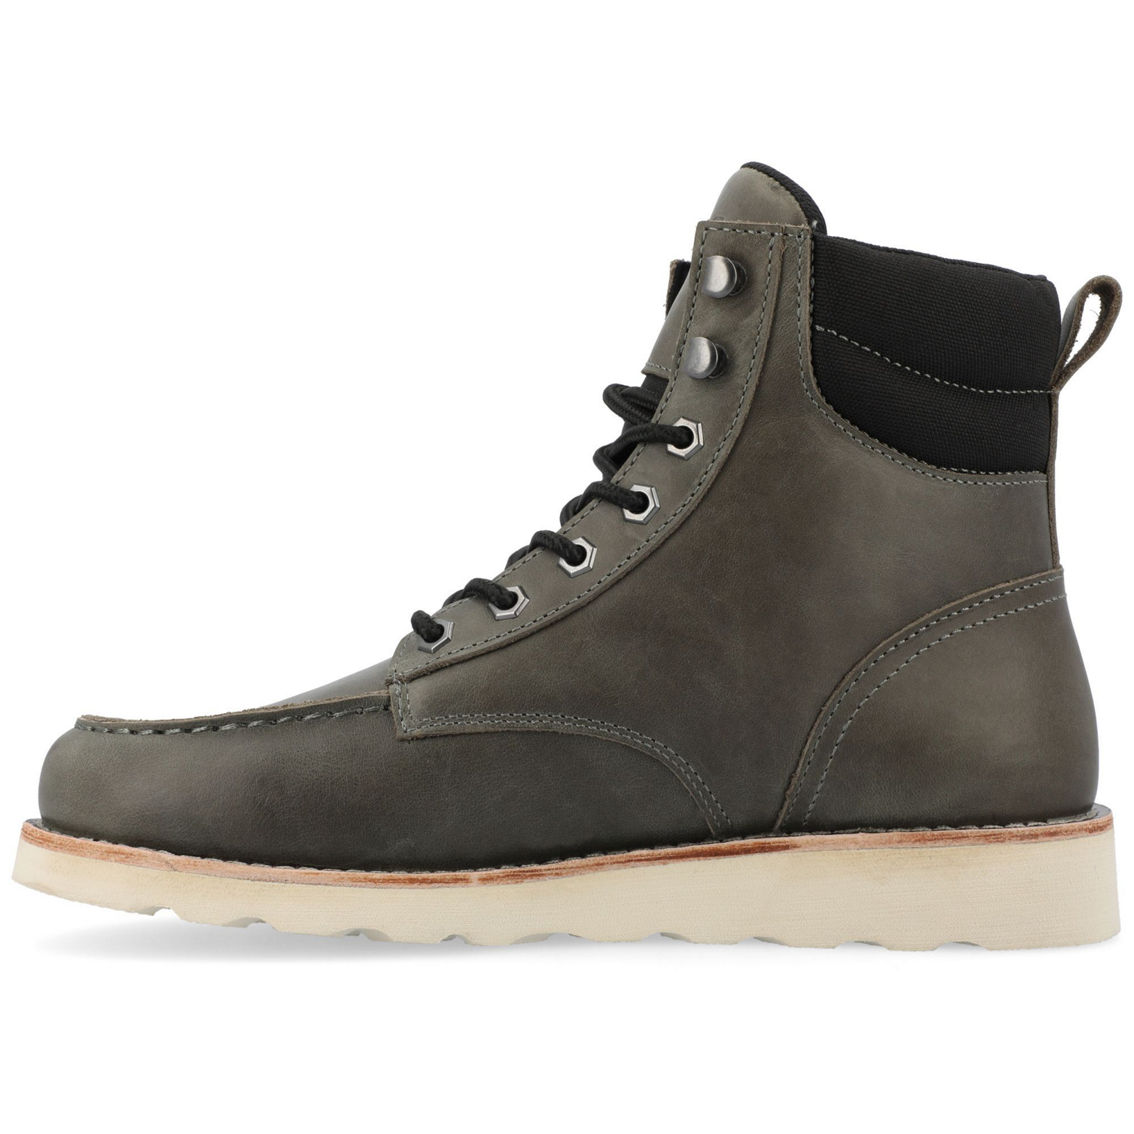 Territory Venture Water Resistant Moc Toe Lace-up Boot - Image 4 of 5